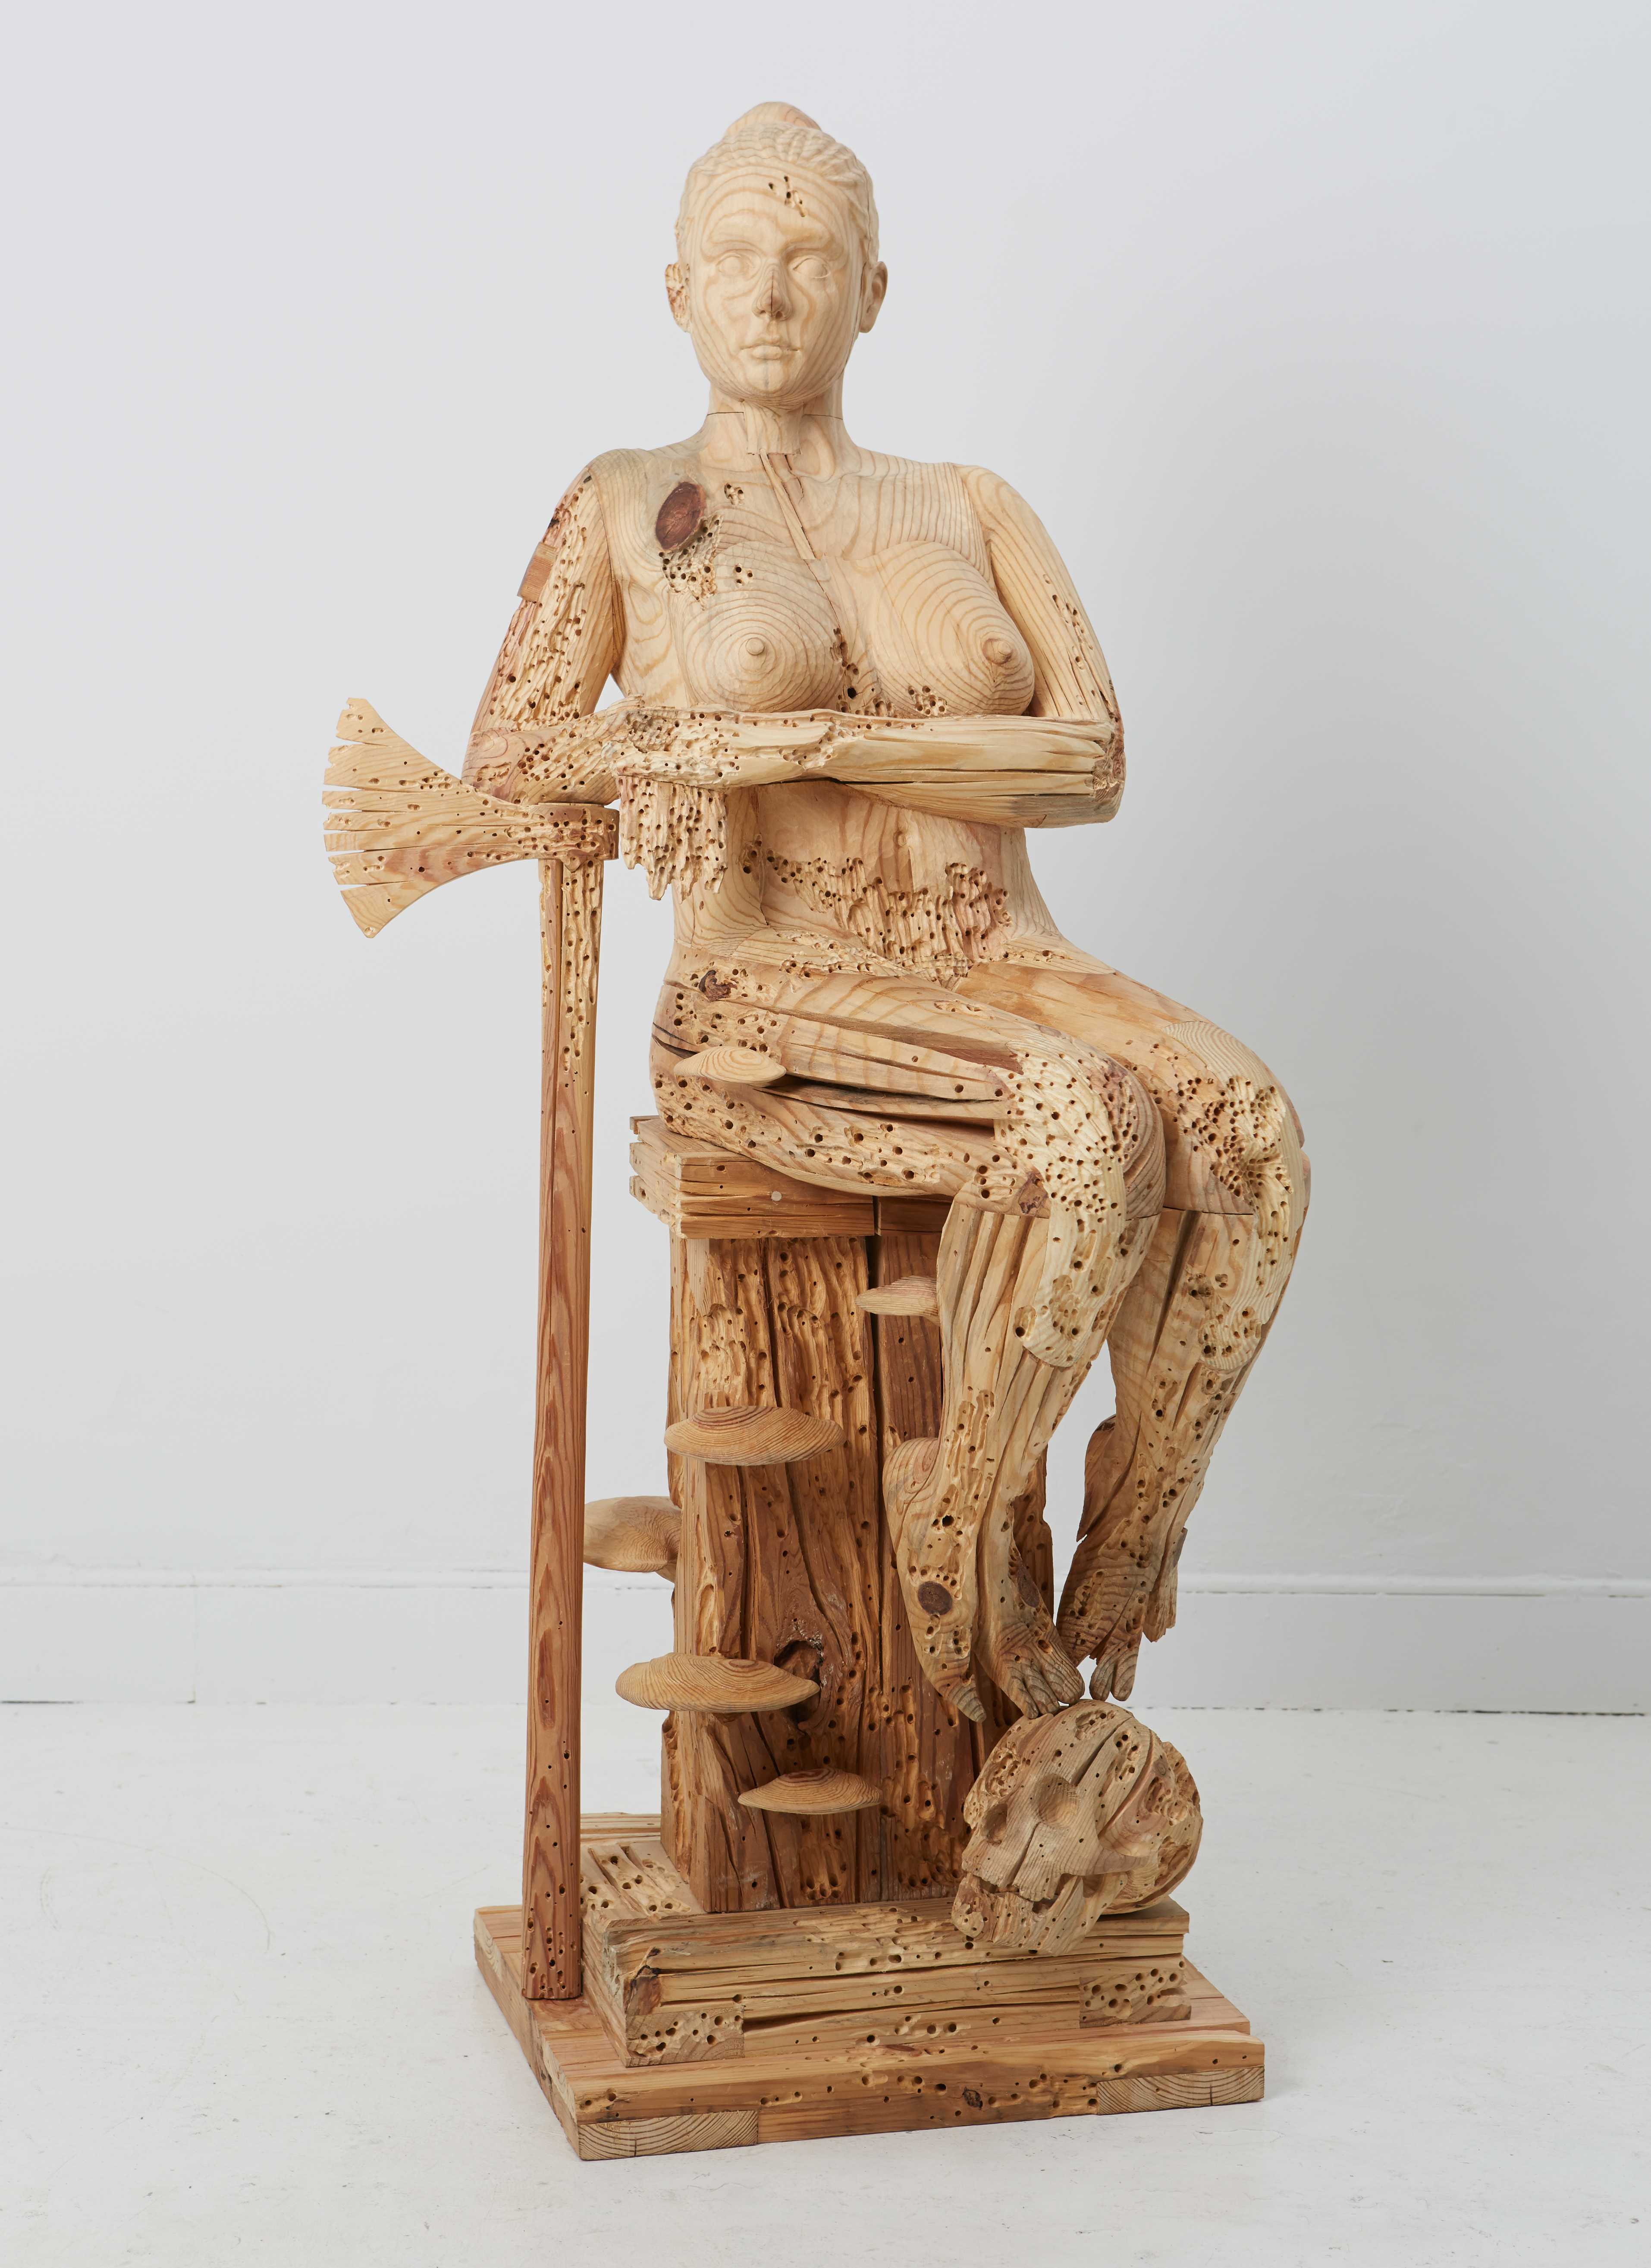 Exhibition of Monumental Wood Sculptures